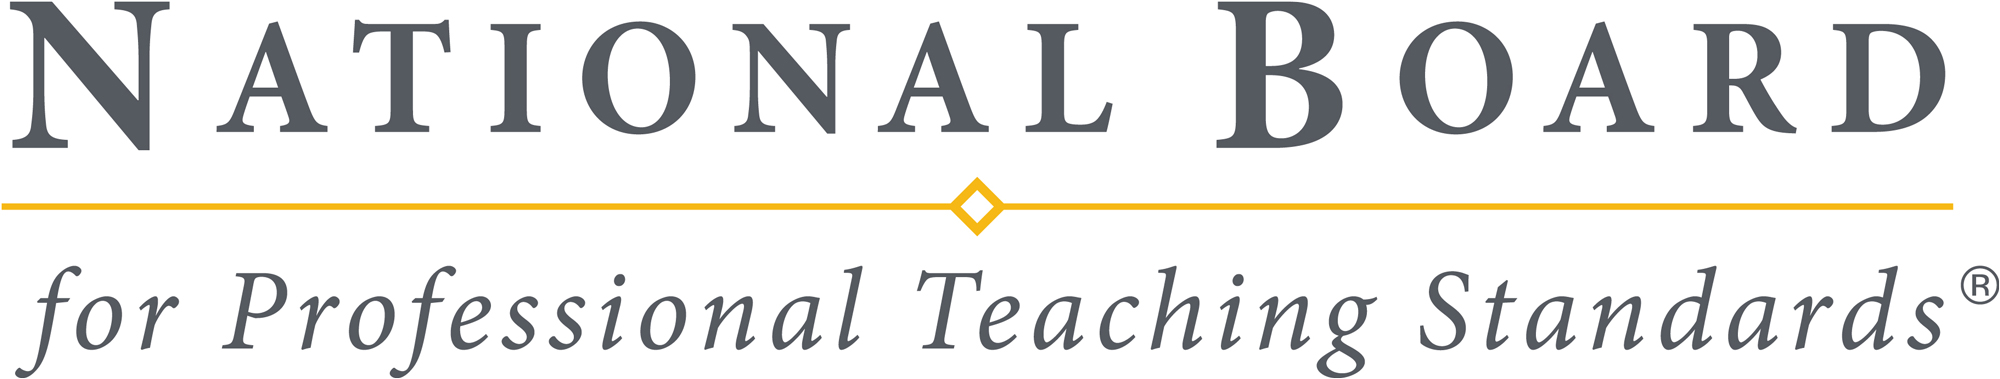 National Board for Professional Teaching Standards typographic logo